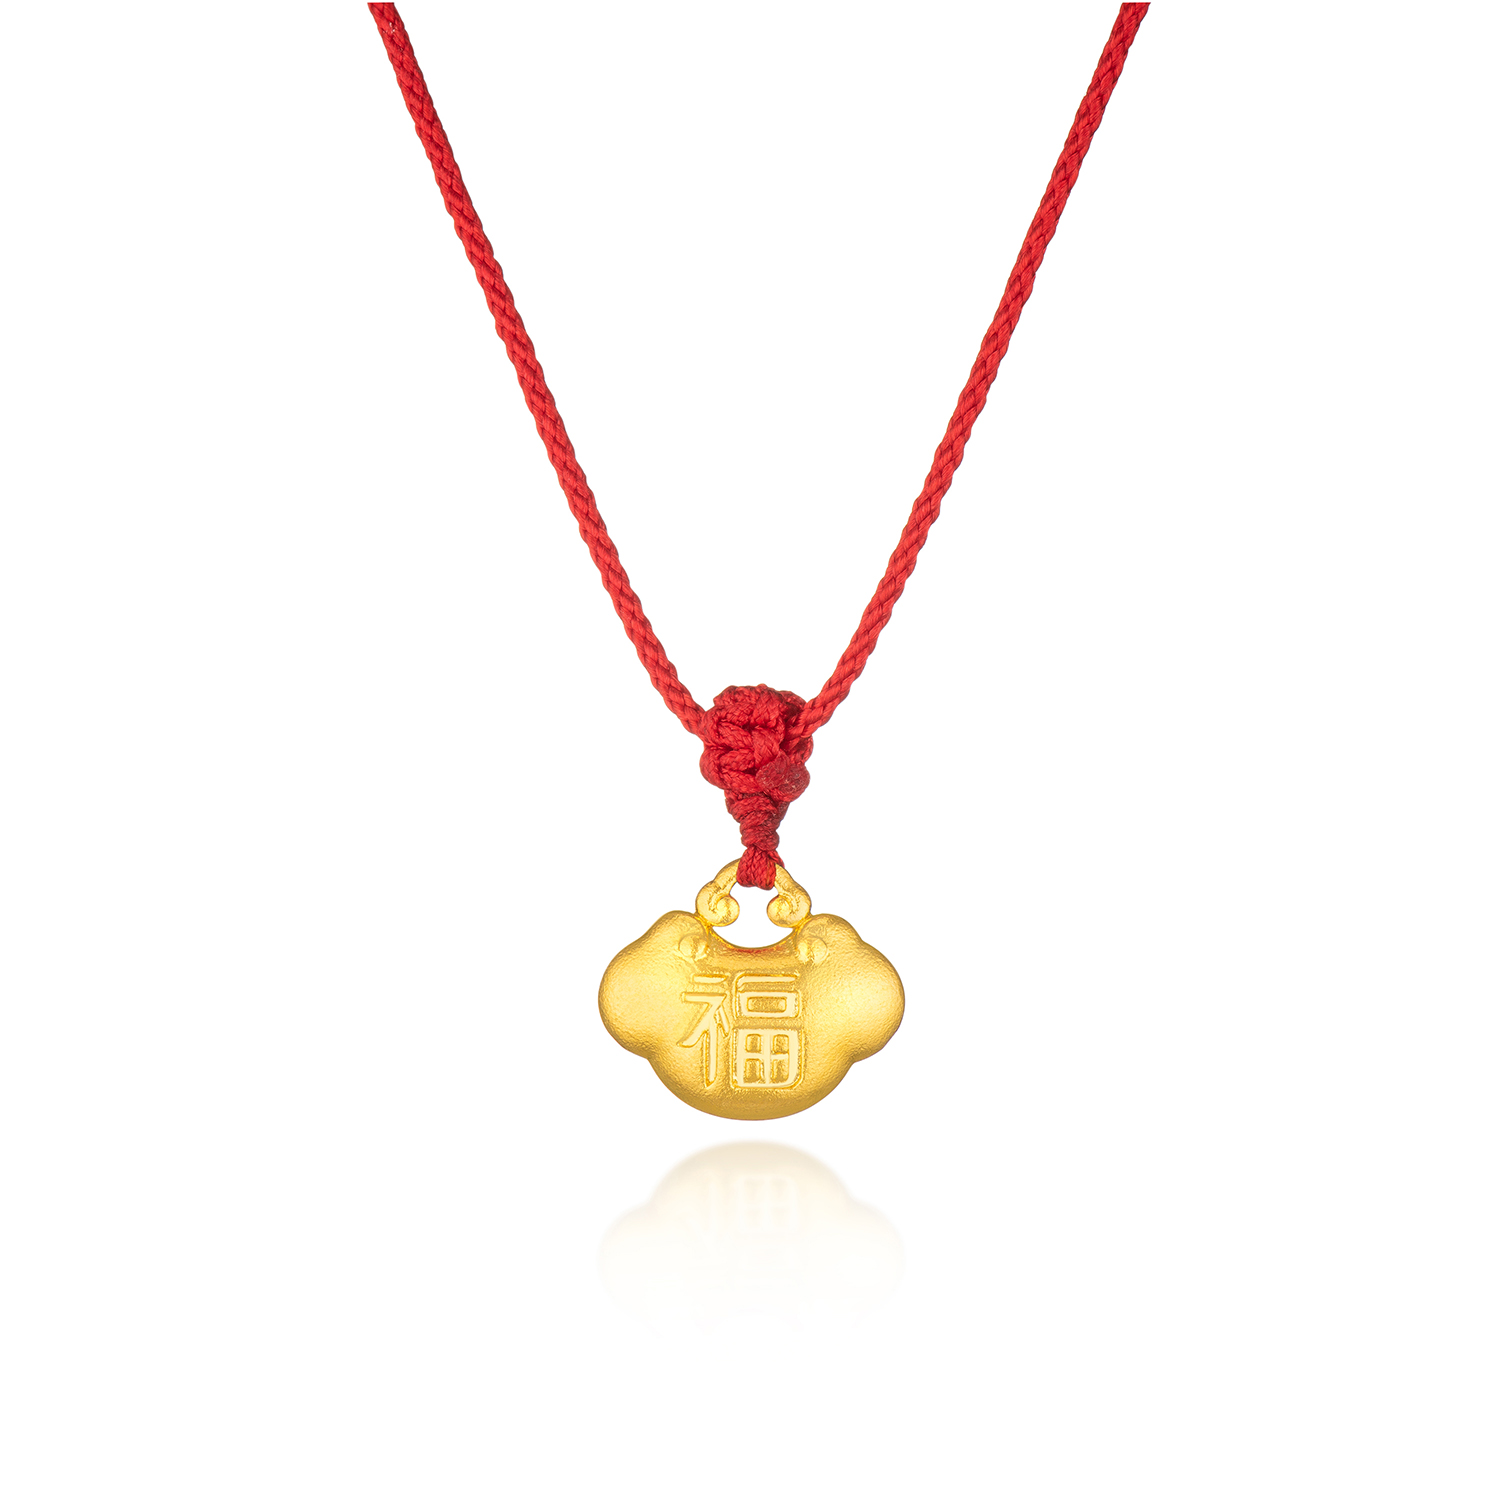 Heirloom Fortune Collection “Peace & Joy” Gold Pendant